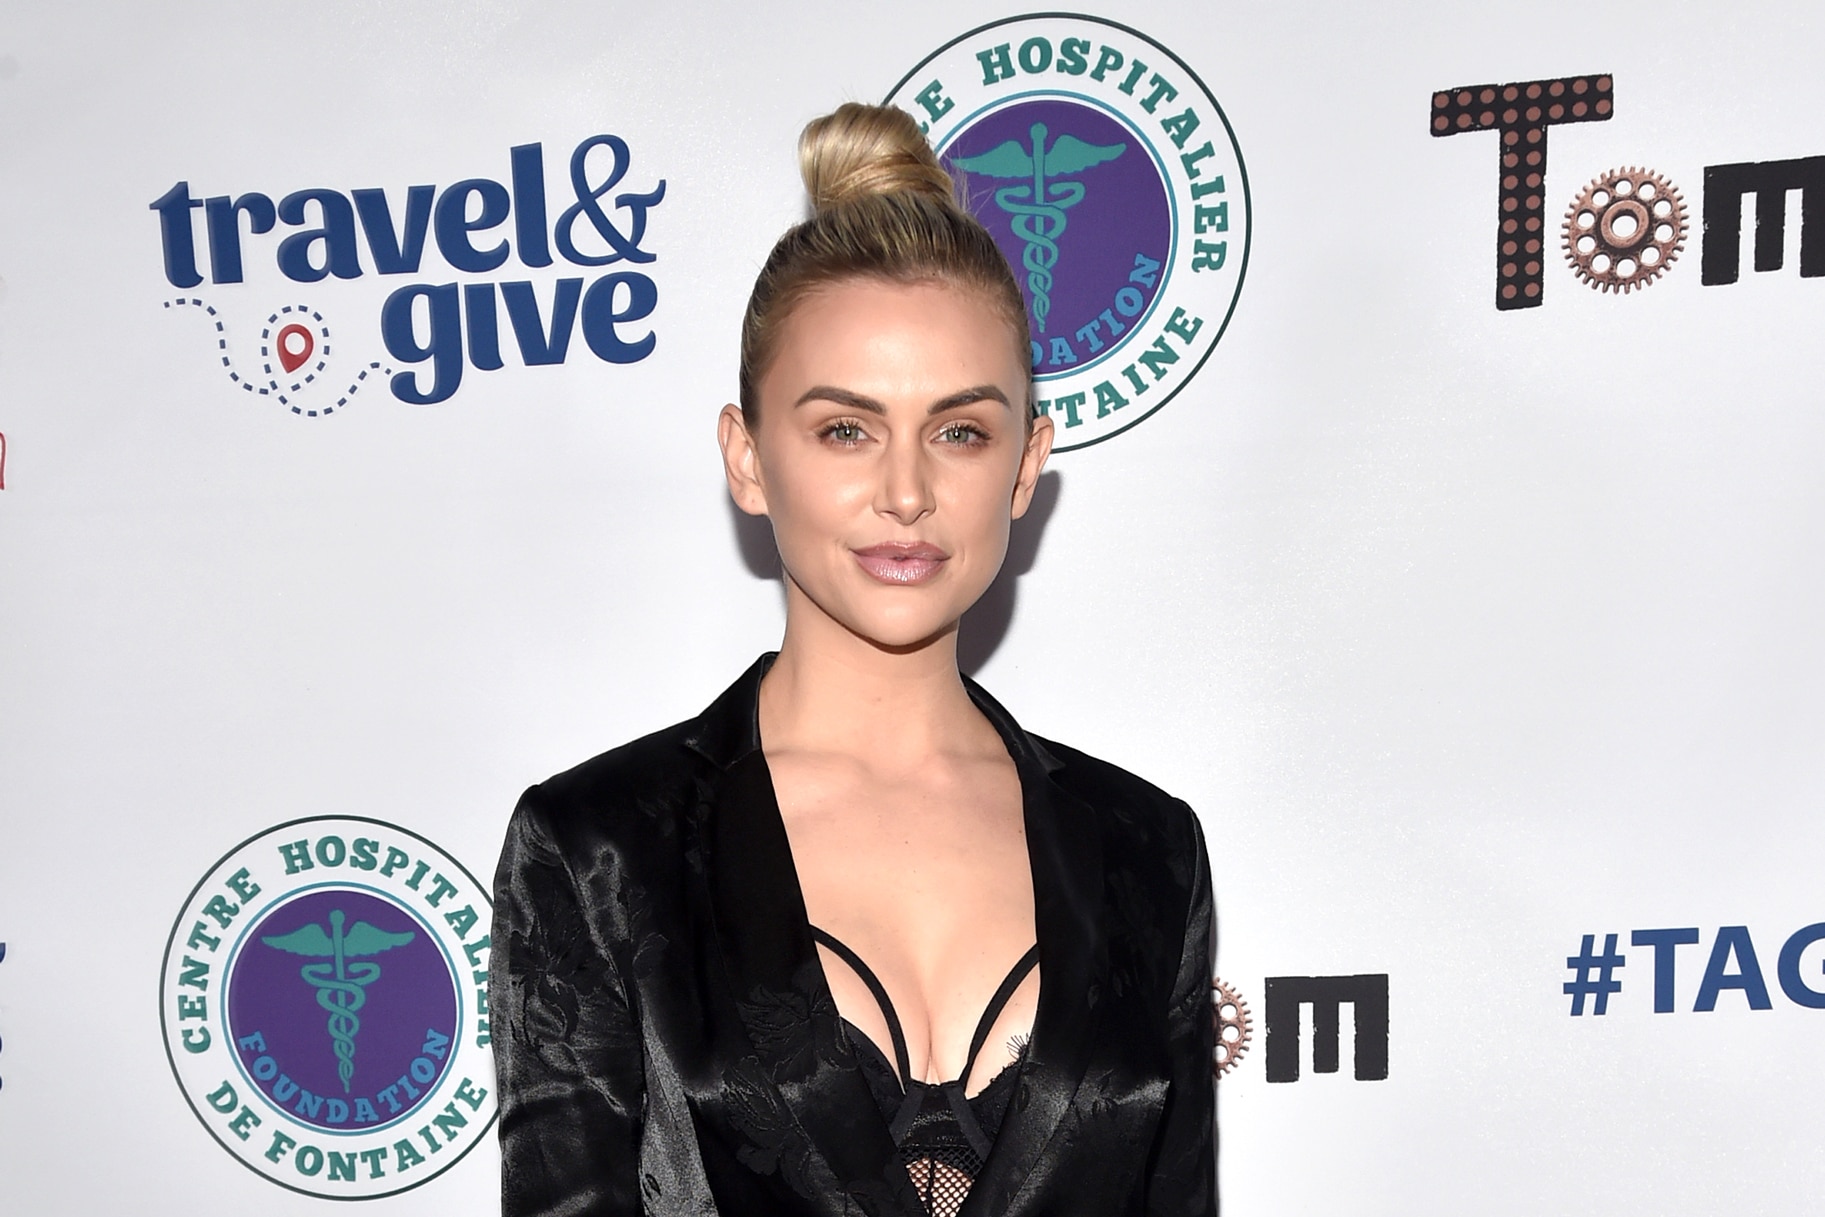 Vanderpump Rules': Lala Kent Shares Update on if She's Dating Anyone Special